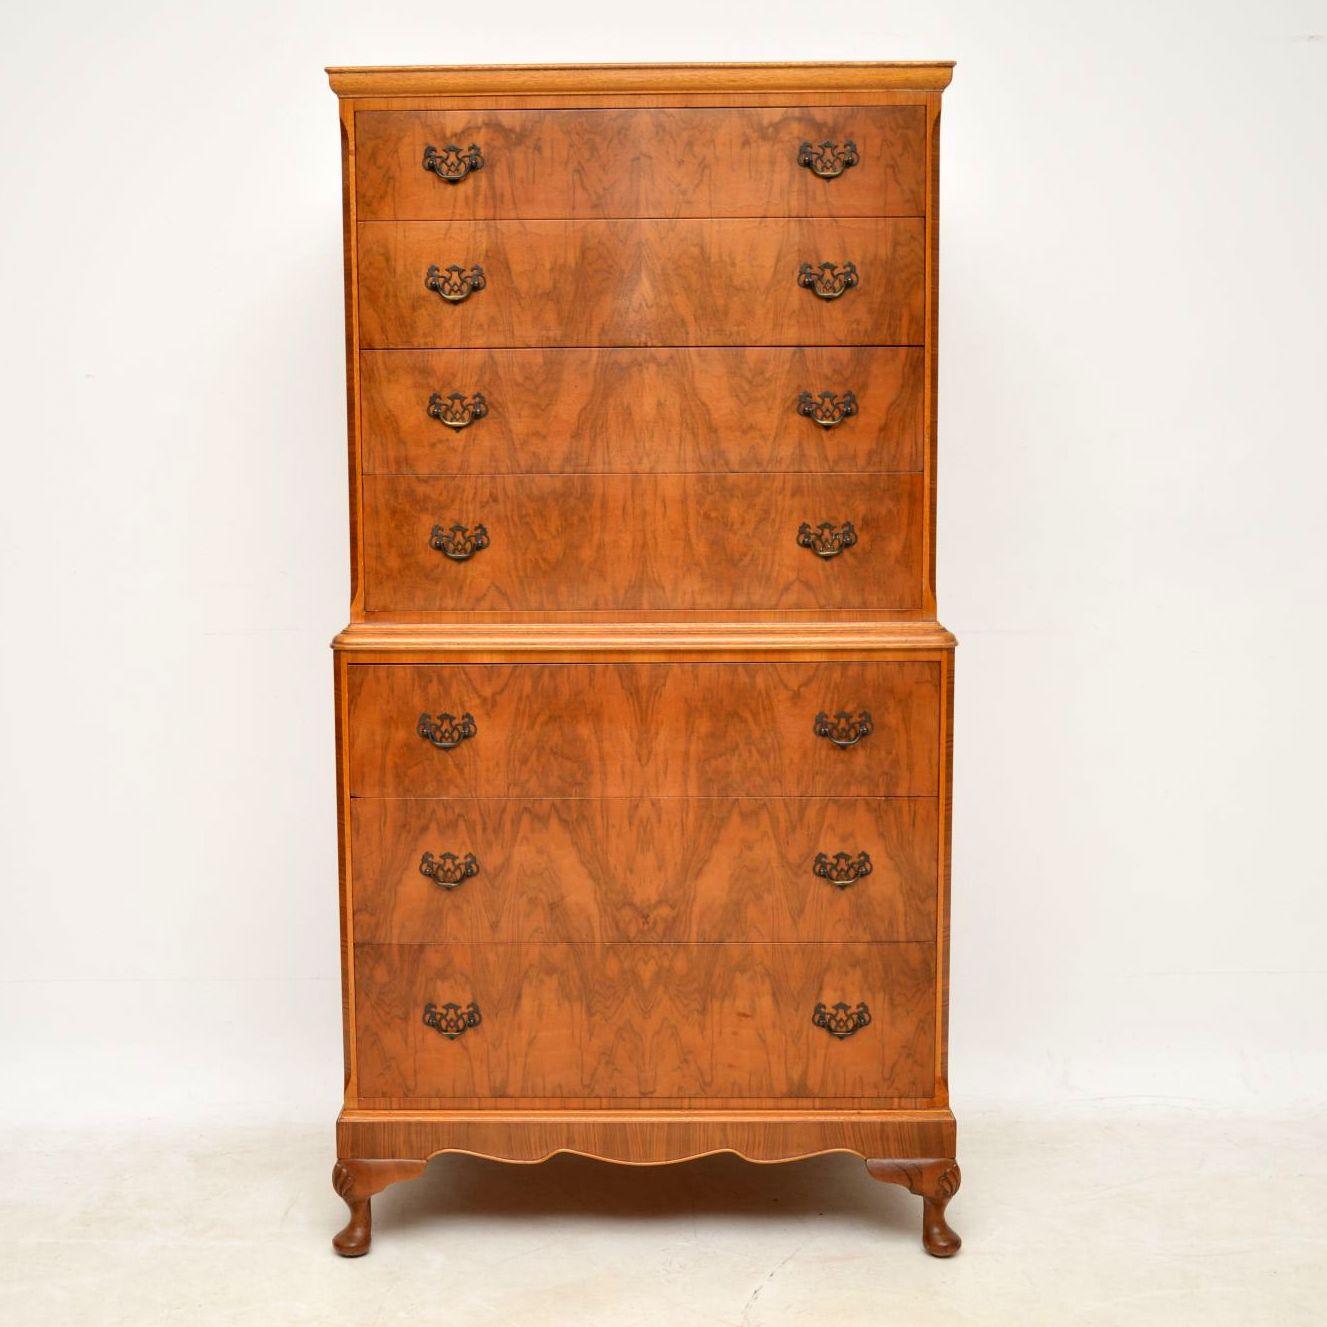 Antique figured walnut chest on chest in excellent condition, dating to circa 1930s period. This chest has a lovely pattern in the wood running right through all the drawers which are graduated in depth. They have original brass handles. The front